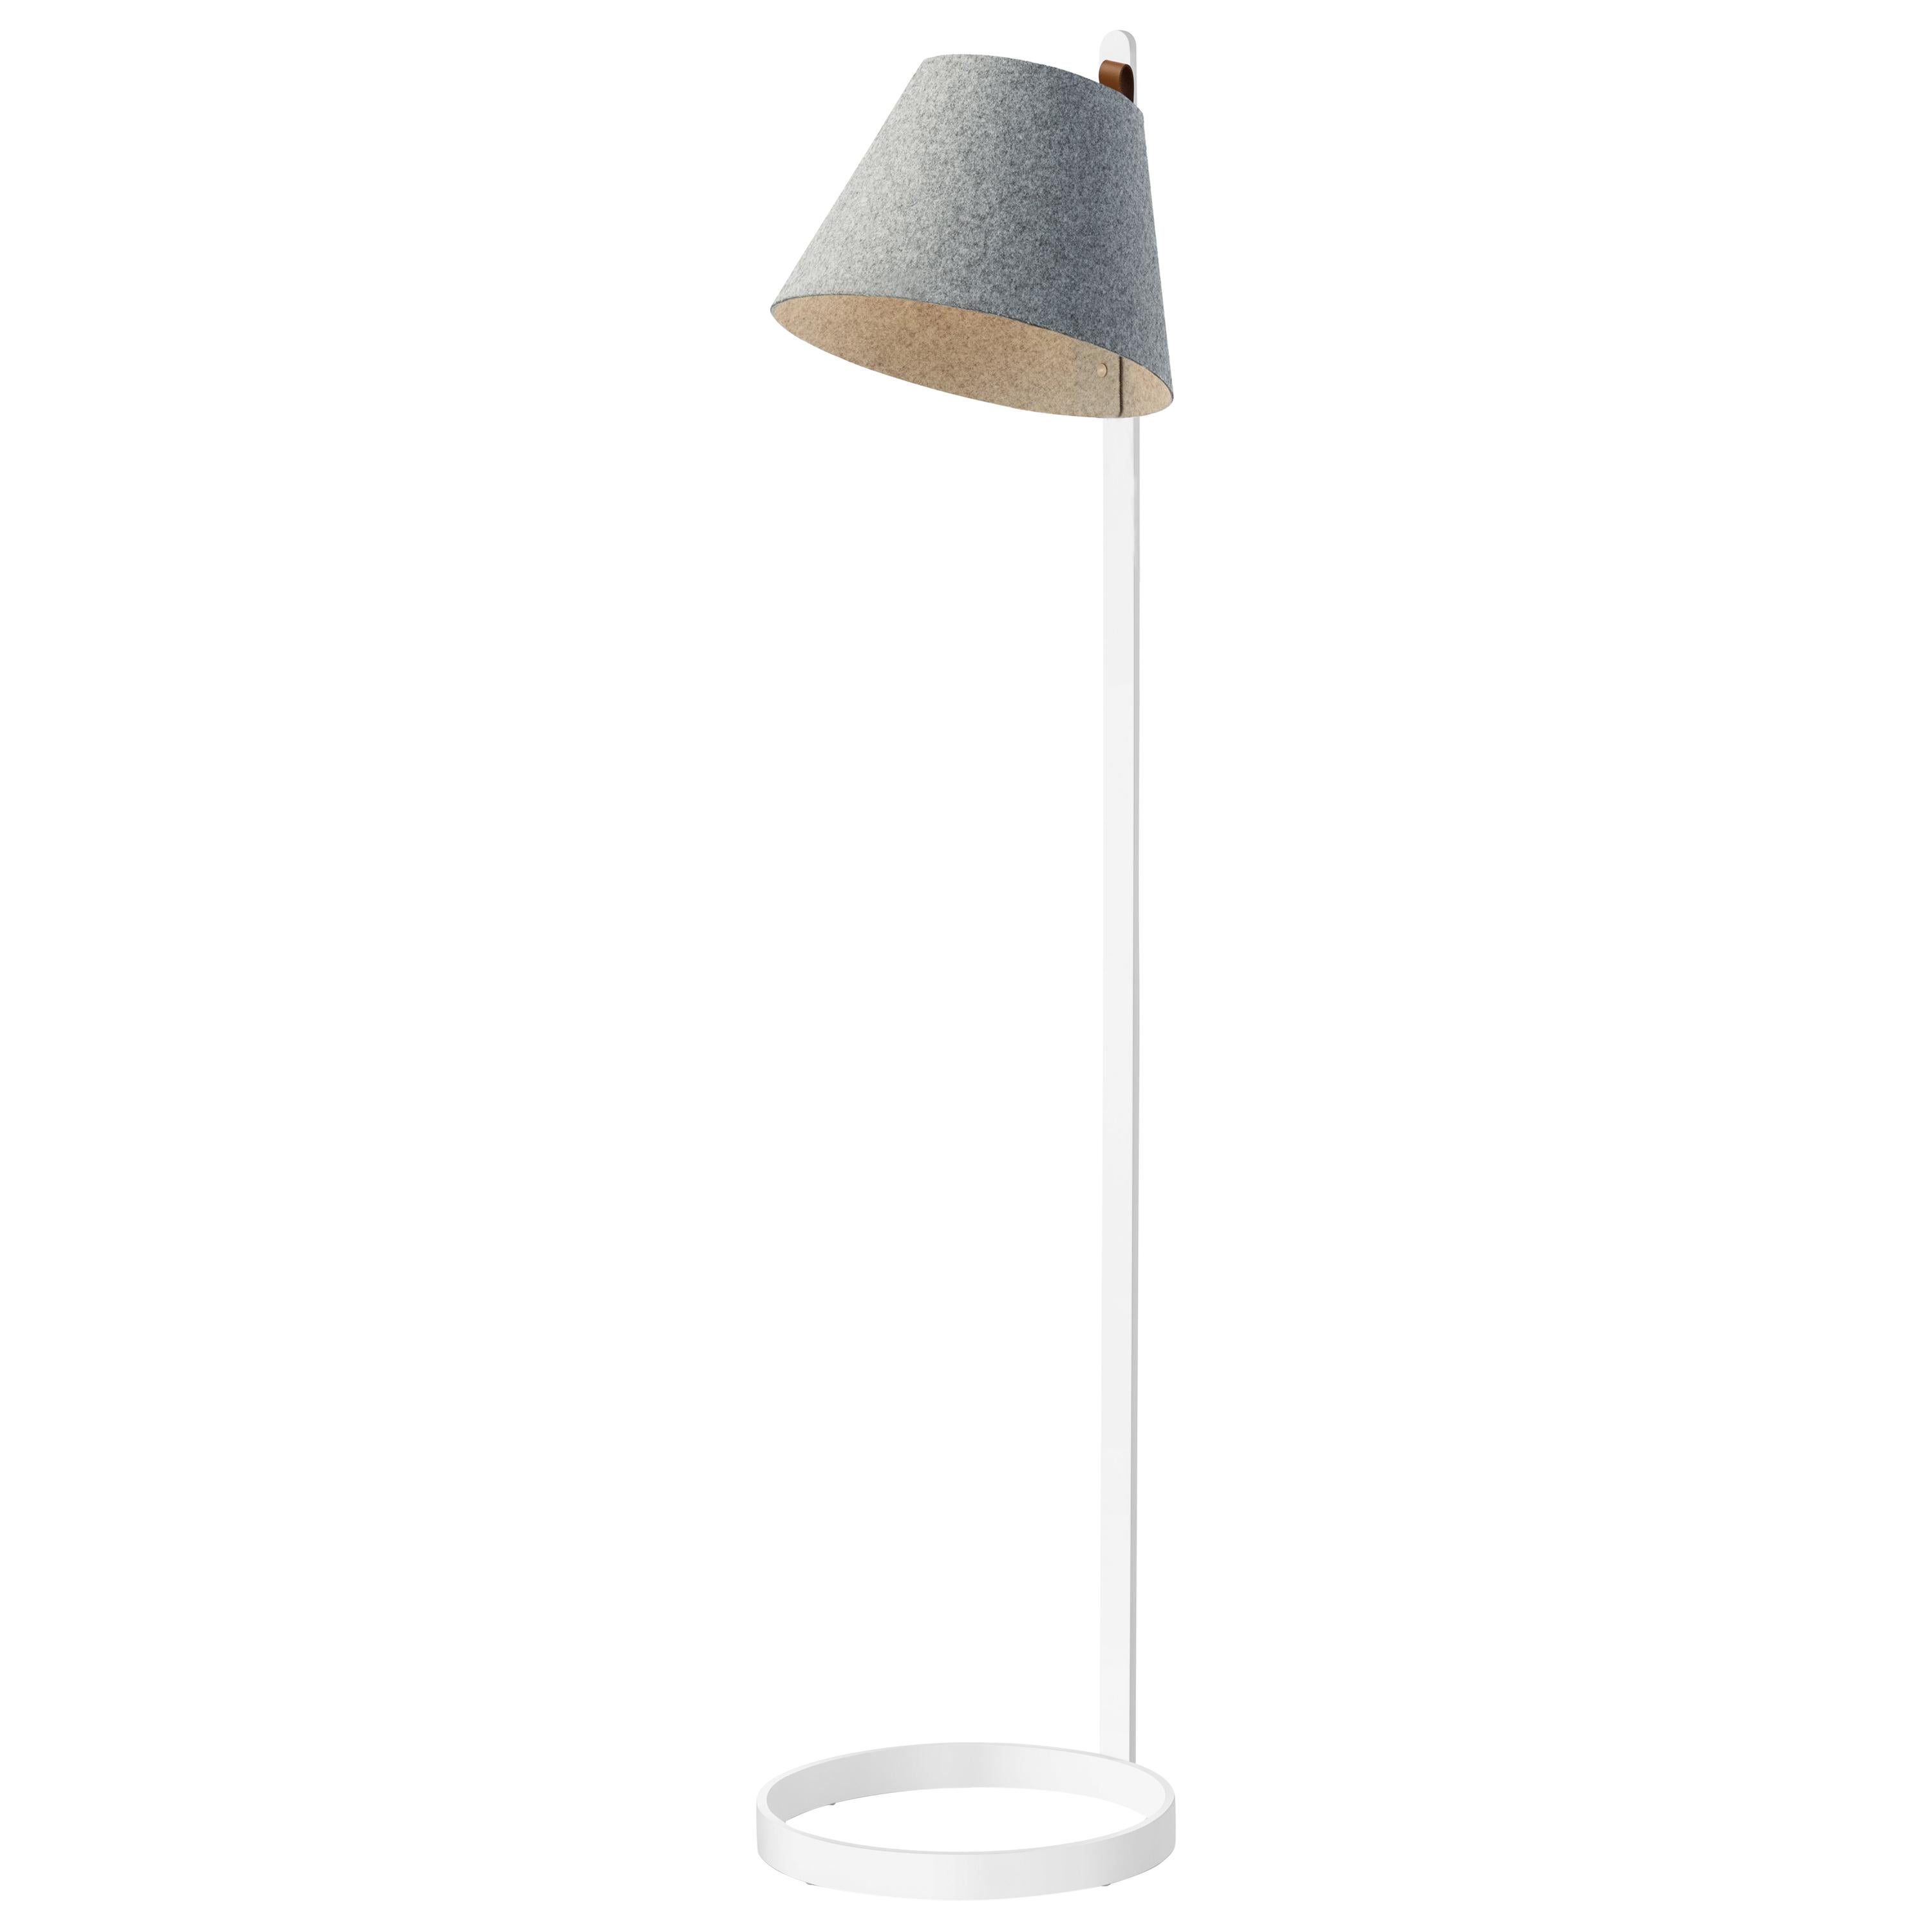 Lana Floor Lamp in Stone and Grey with White Base by Pablo Designs